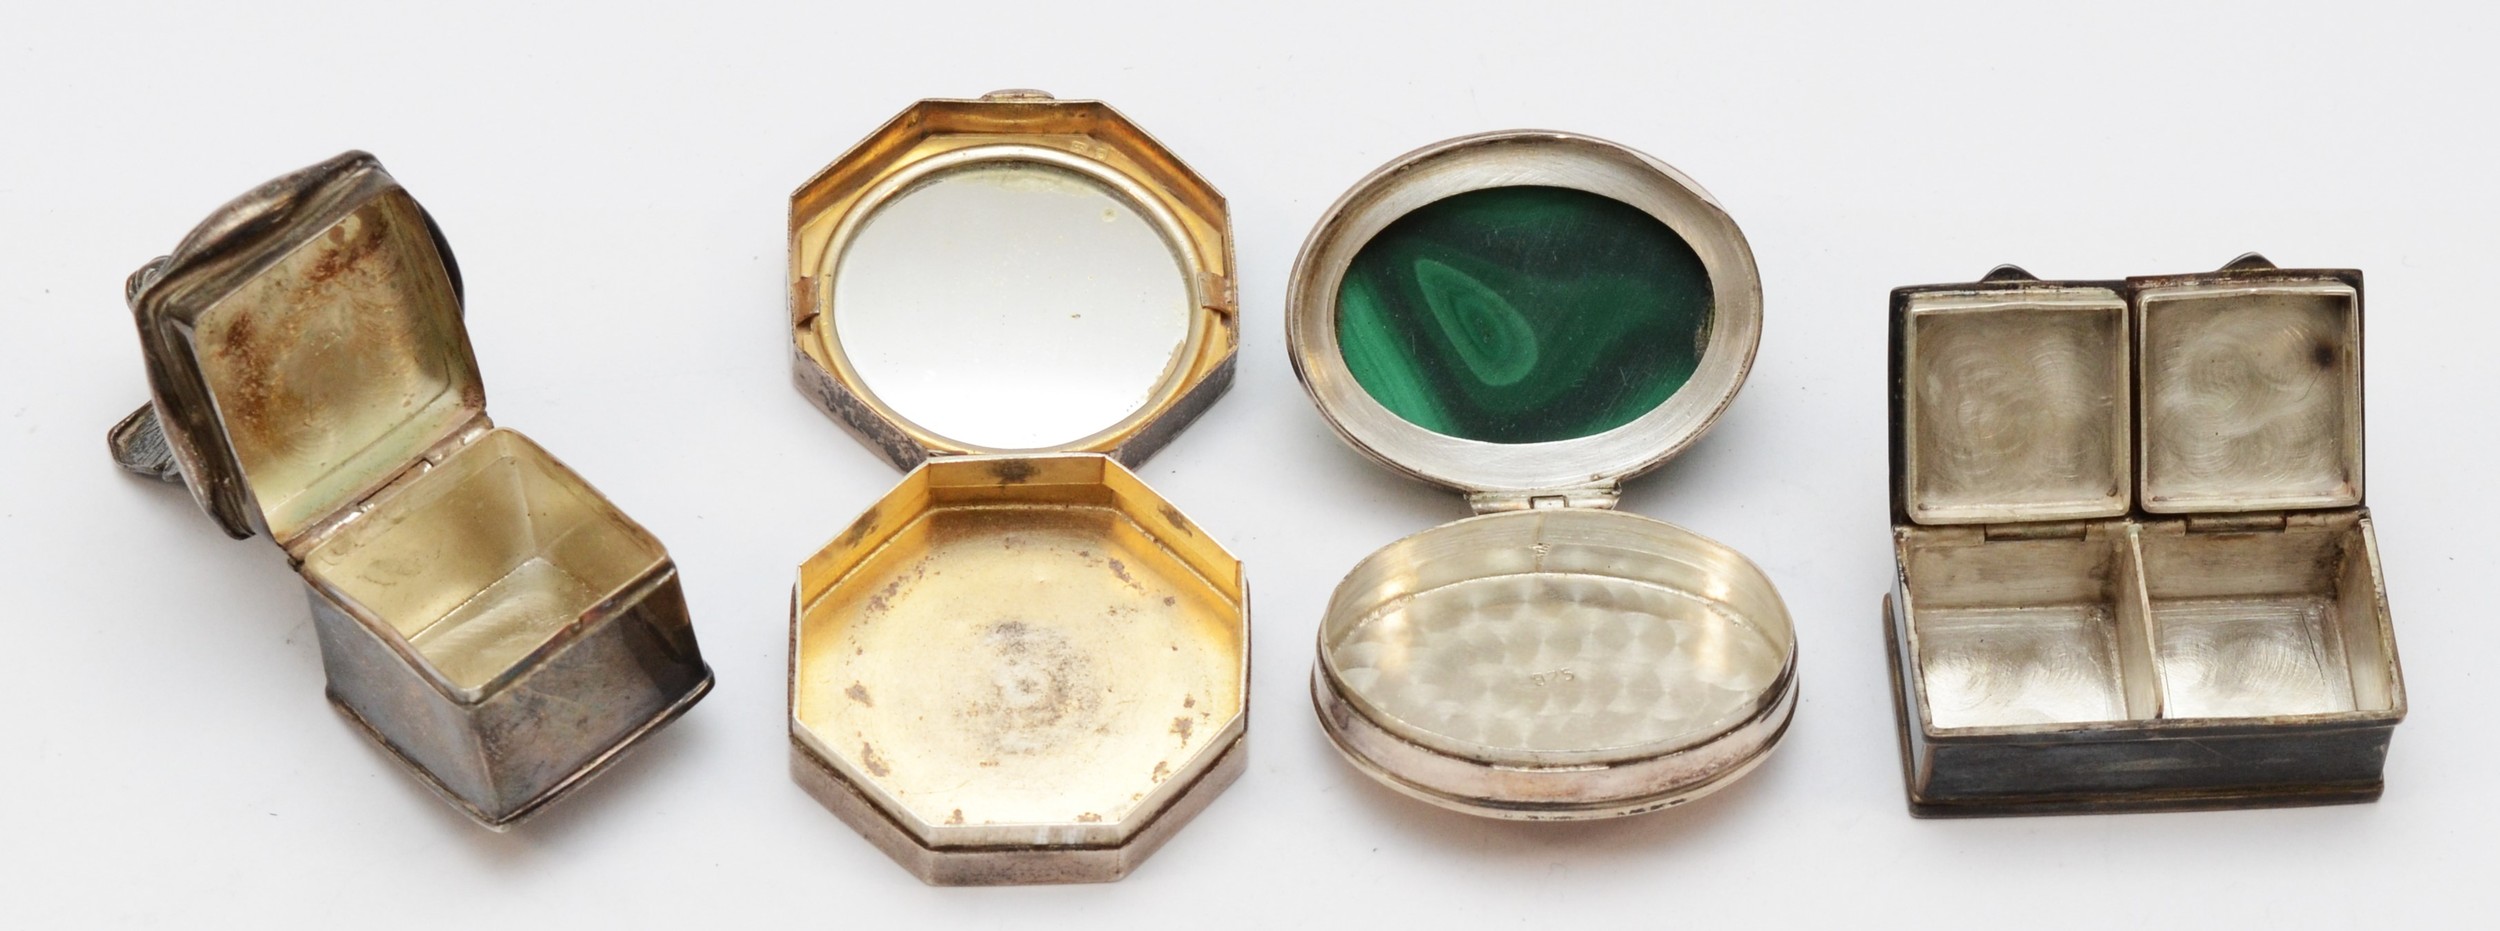 An Art Deco octagonal silver powder compact, London 1928, opening to reveal a mirror, no puff, a - Image 2 of 2